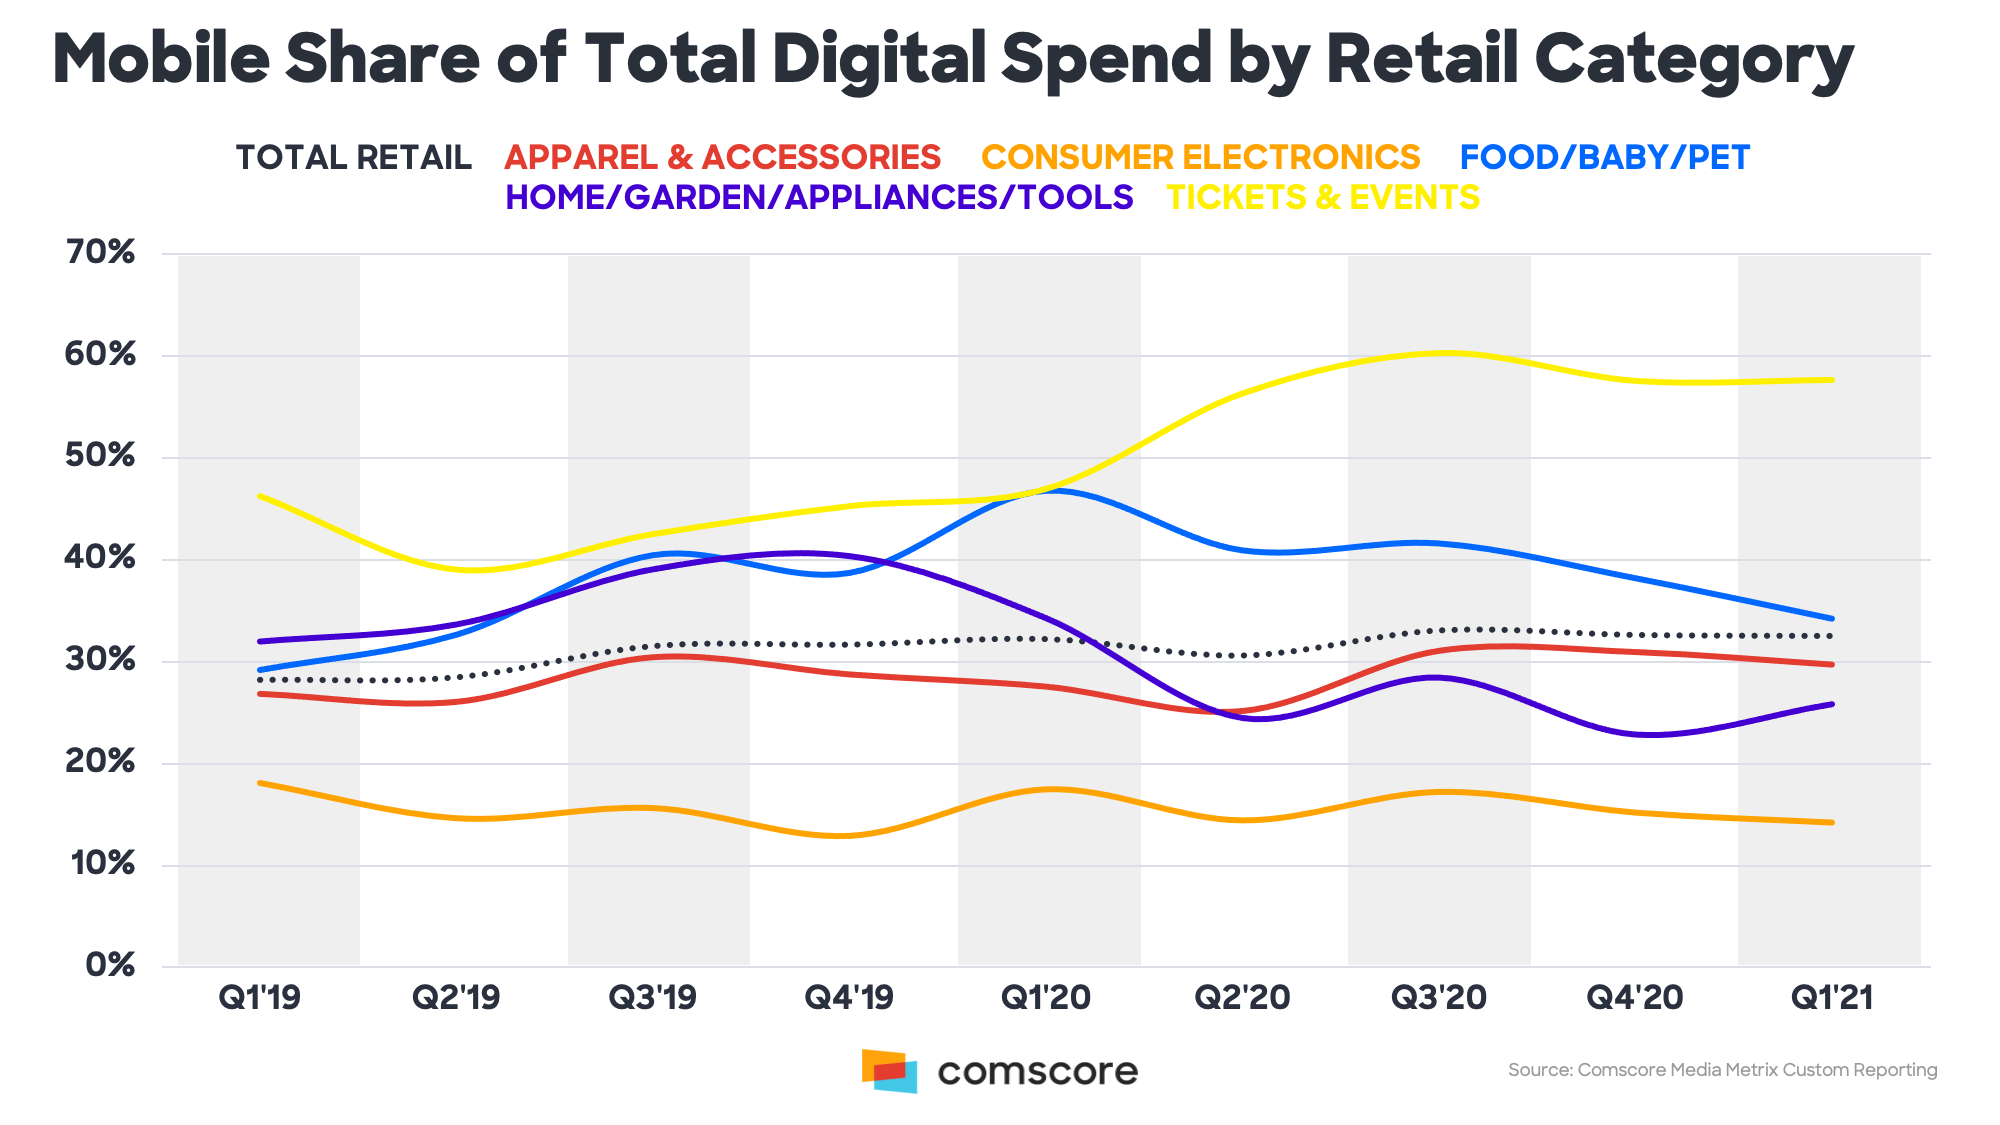 Mobile Share of Total Digital Spend by Retail Category